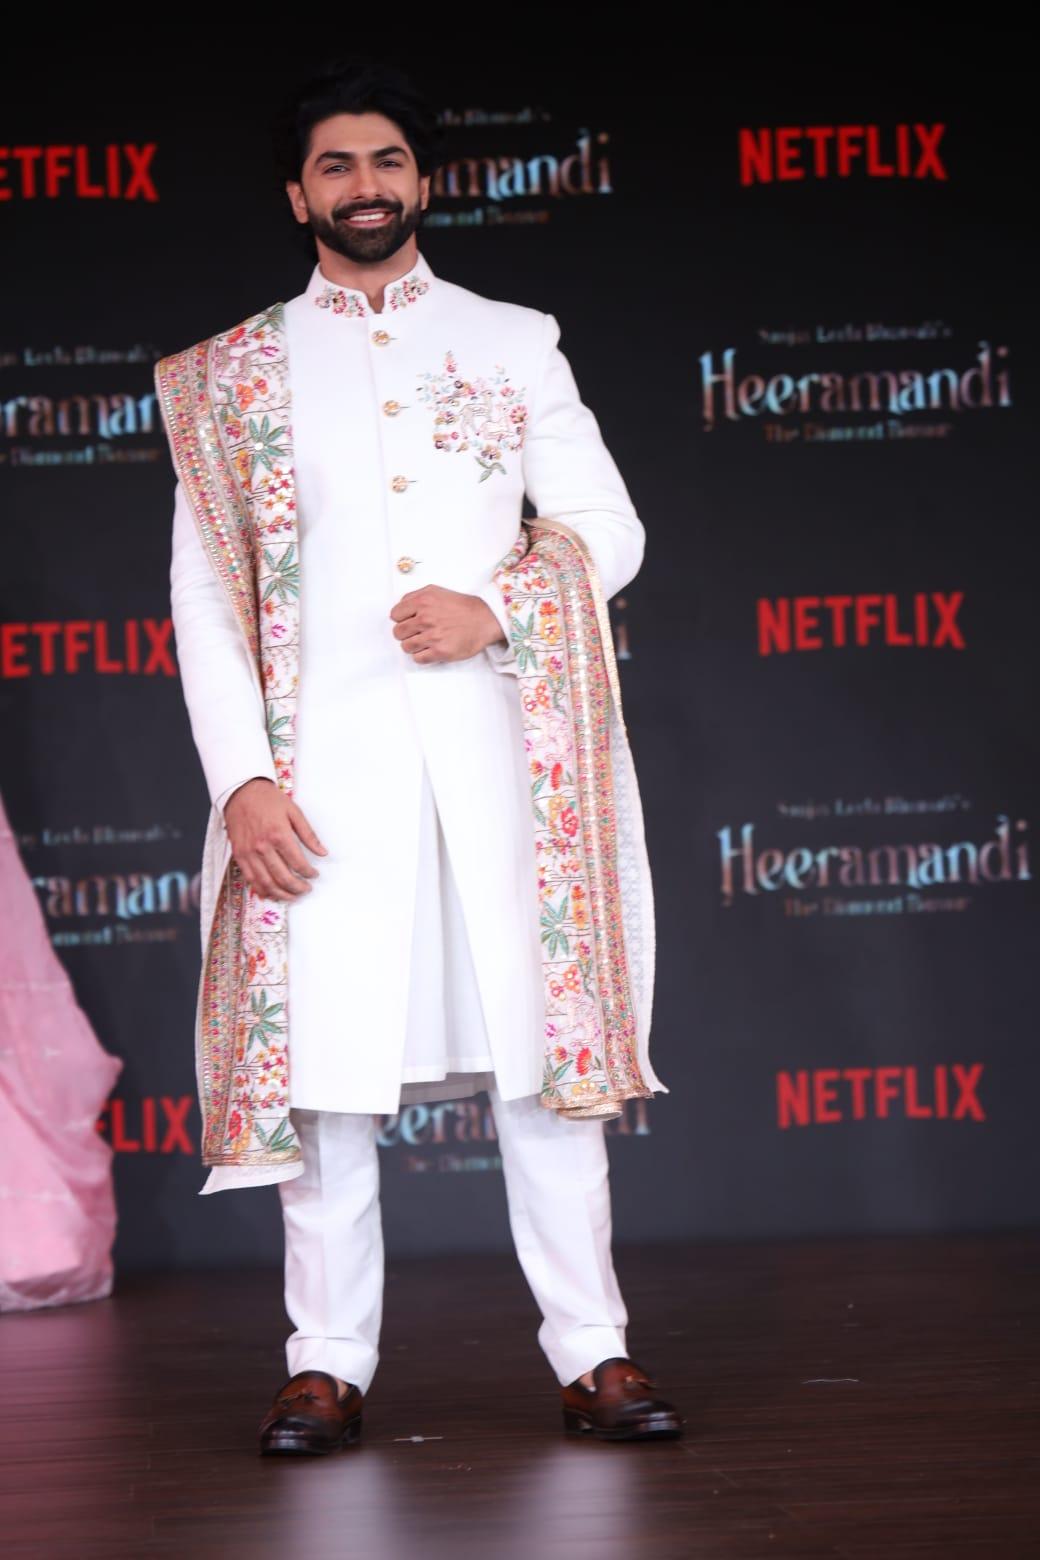 Taha Shah Badussha's royal look at the event stole hearts. The actor arrived wearing a gorgeous white sherwani